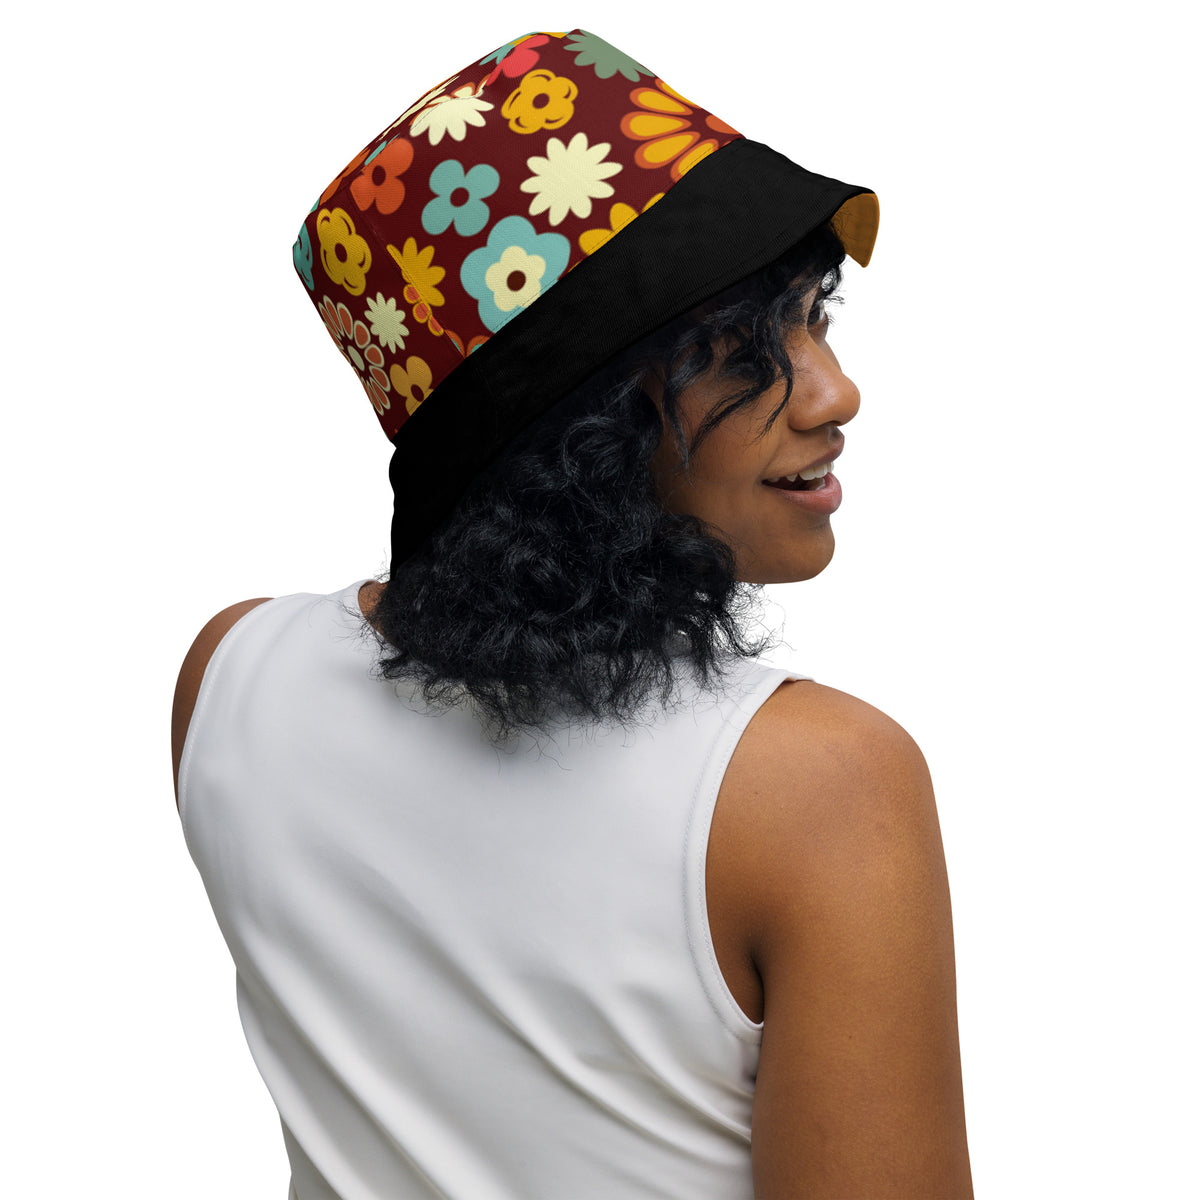 Retro Collection Reversible bucket hat - Area F Island Clothing